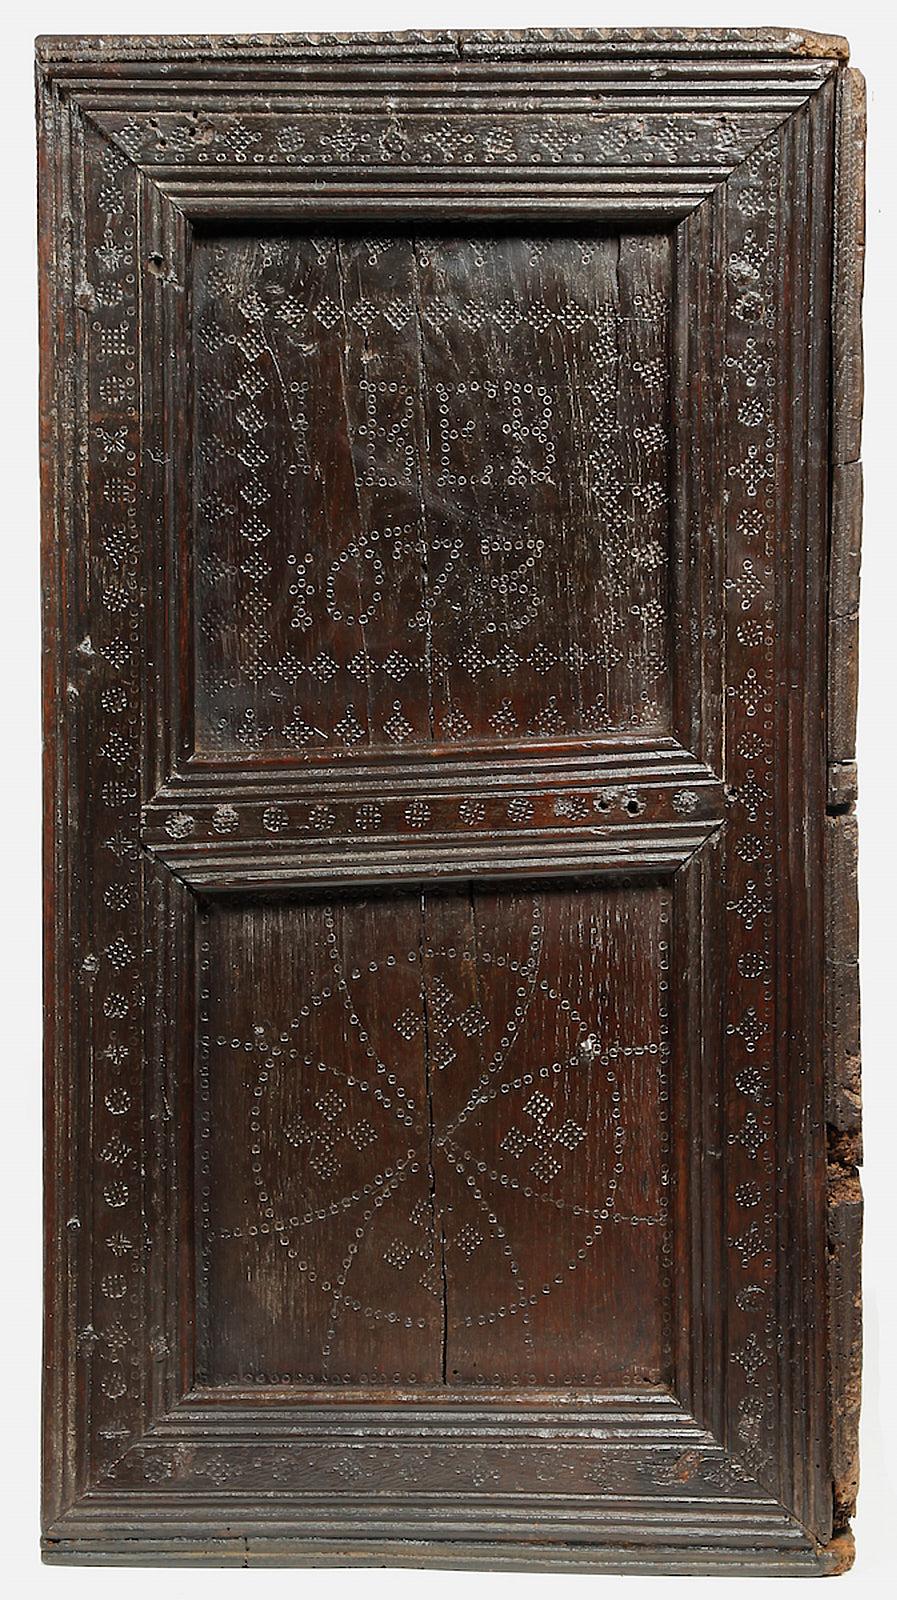 Charles II oak wall cupboard, English, Yorkshire, circa 1673.

The single panel door with applied moldings simulating paneled construction, decorated all-over with punch and stencil patterns. With twin end molded panels similarly decorated, the